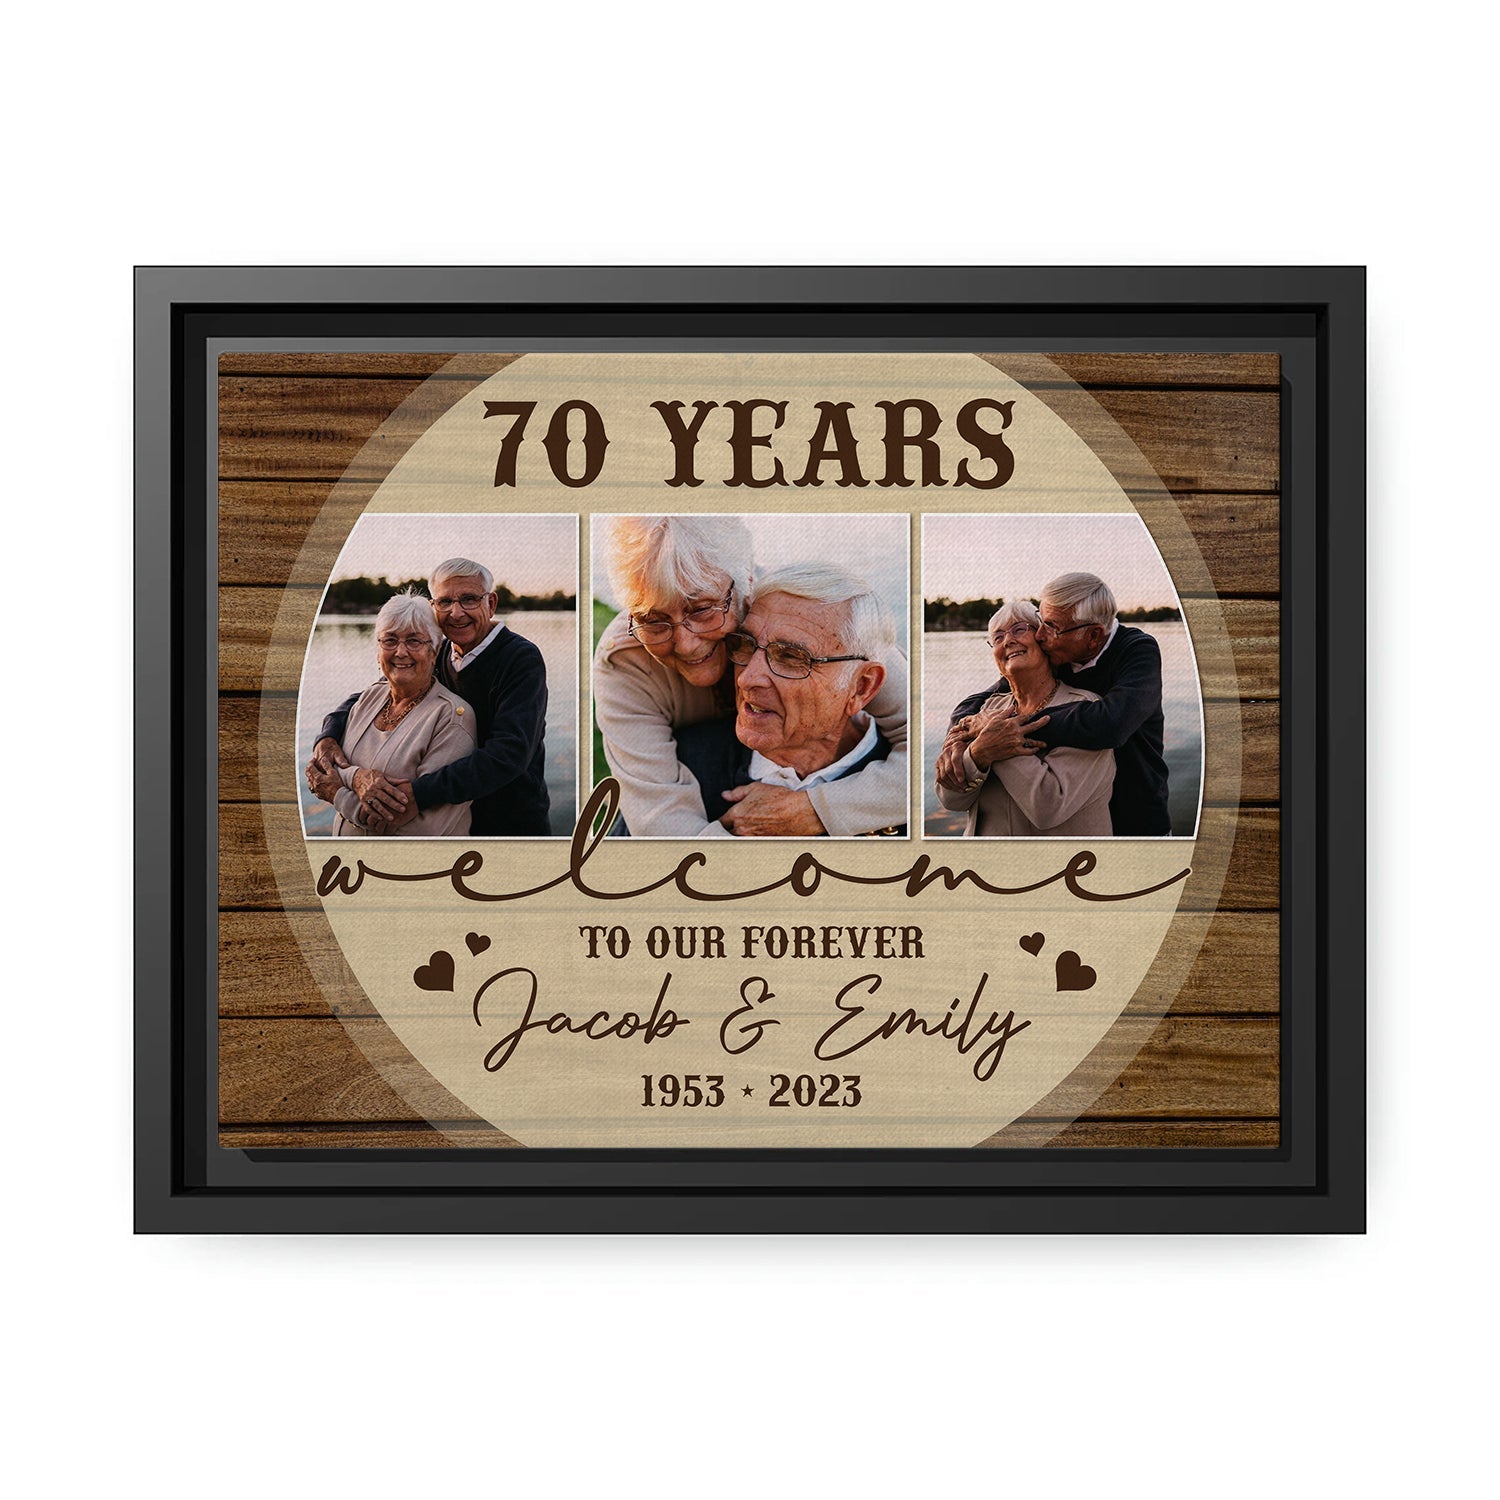 70 Years Welcome To Our Forever - Personalized 70 Year Anniversary gift for Parents, Husband or Wife - Custom Canvas Print - MyMindfulGifts